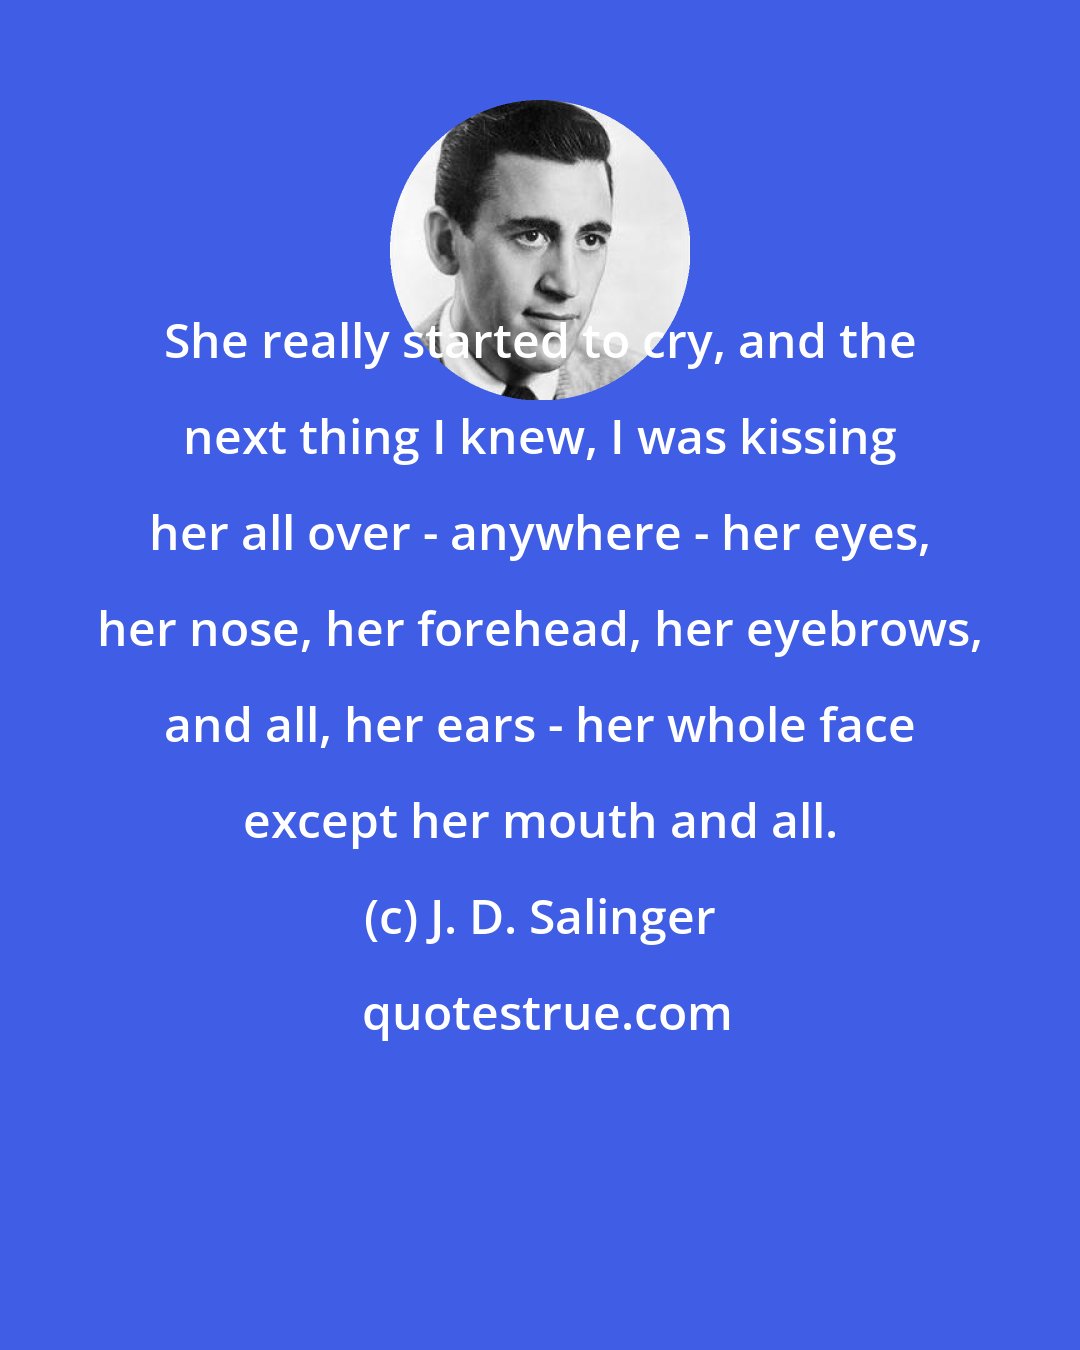 J. D. Salinger: She really started to cry, and the next thing I knew, I was kissing her all over - anywhere - her eyes, her nose, her forehead, her eyebrows, and all, her ears - her whole face except her mouth and all.